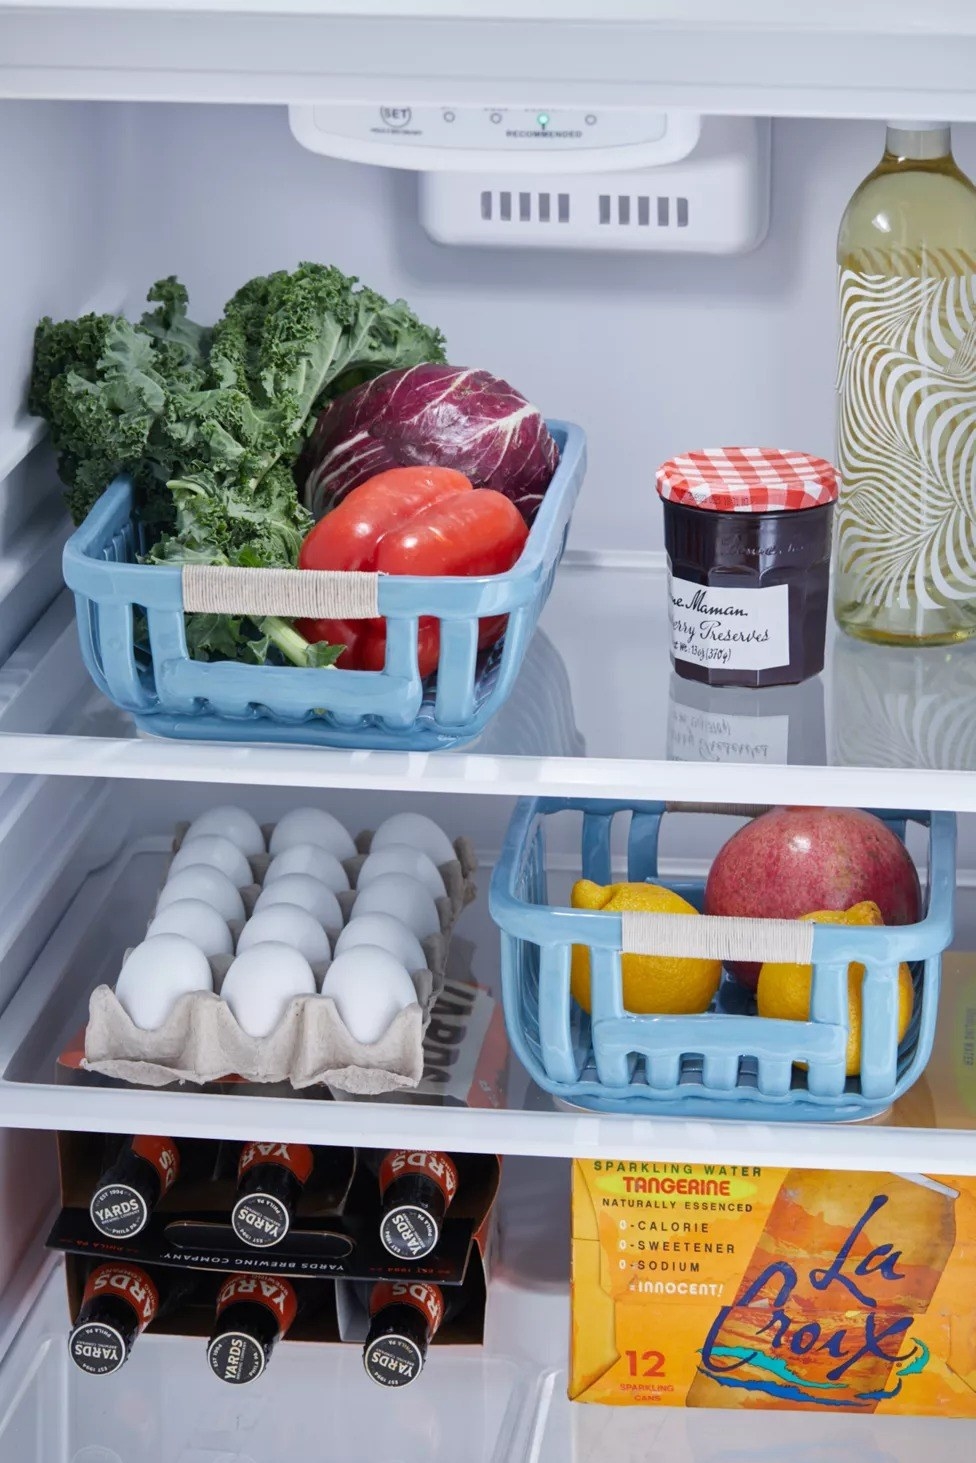 Two blue ceramic baskets are shown in a fridge